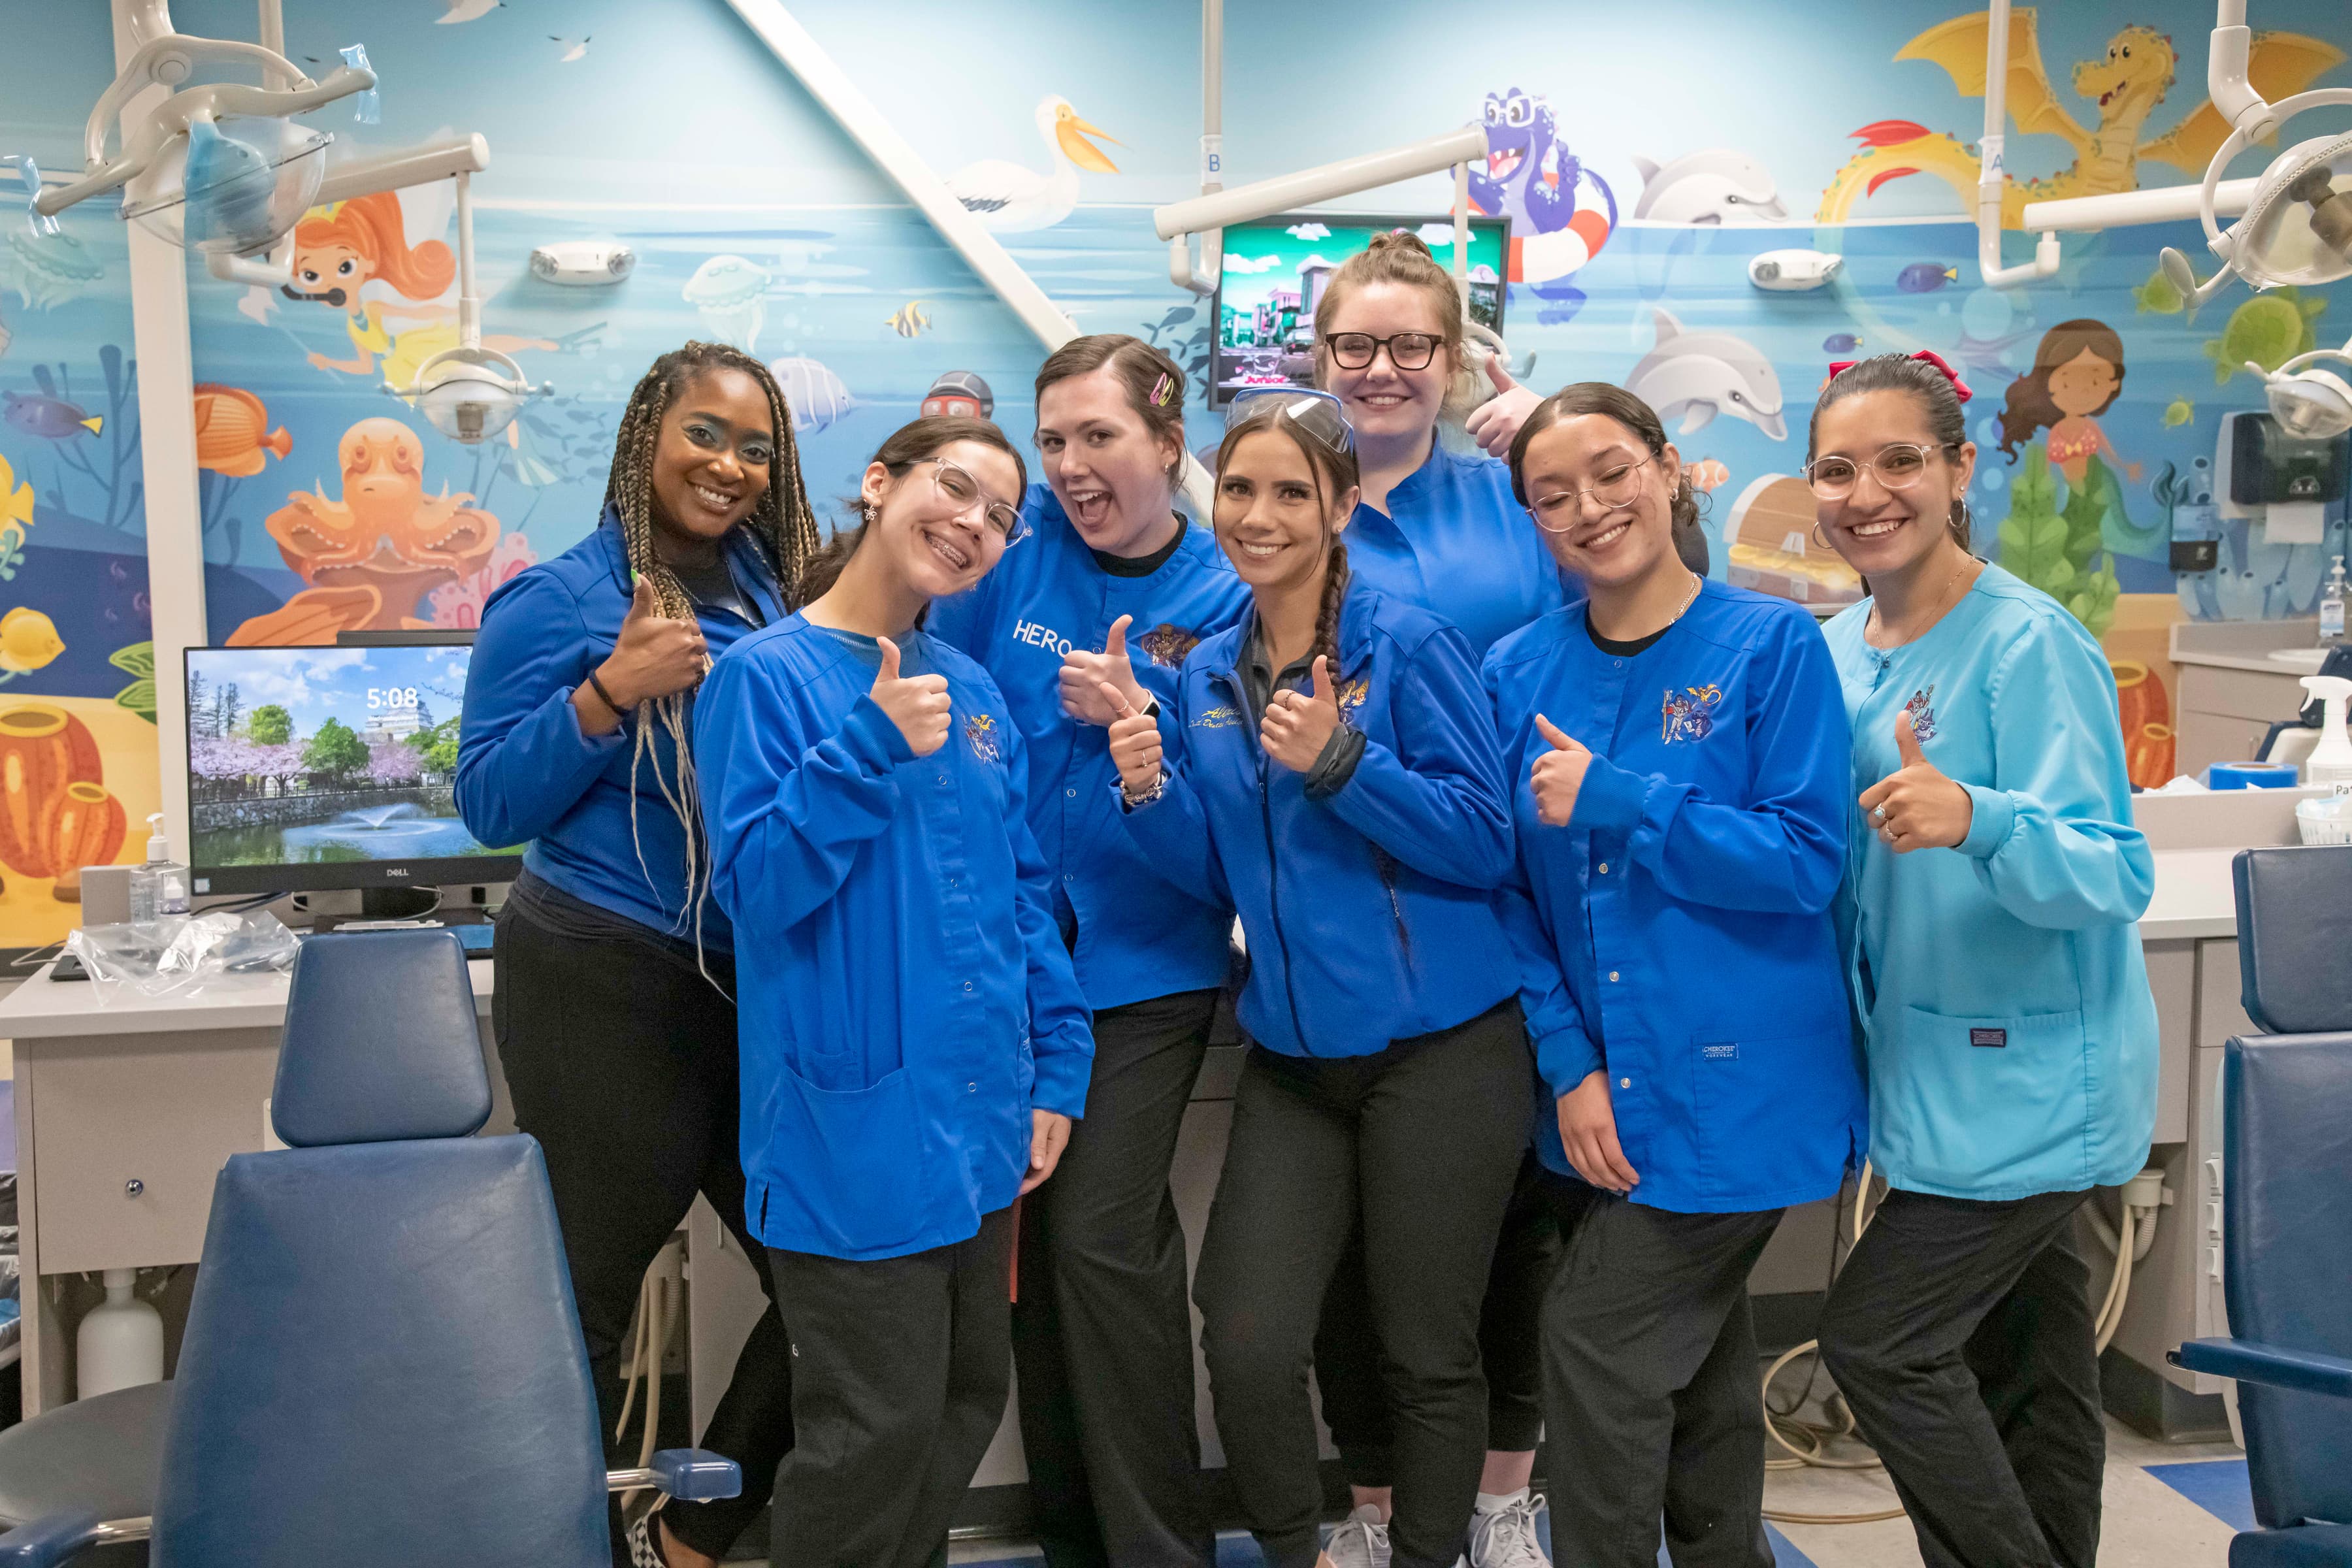 pediatric dental care and vision care staff of seven people at the north Colorado Springs office smiling and waving, wearing blue medical clothing